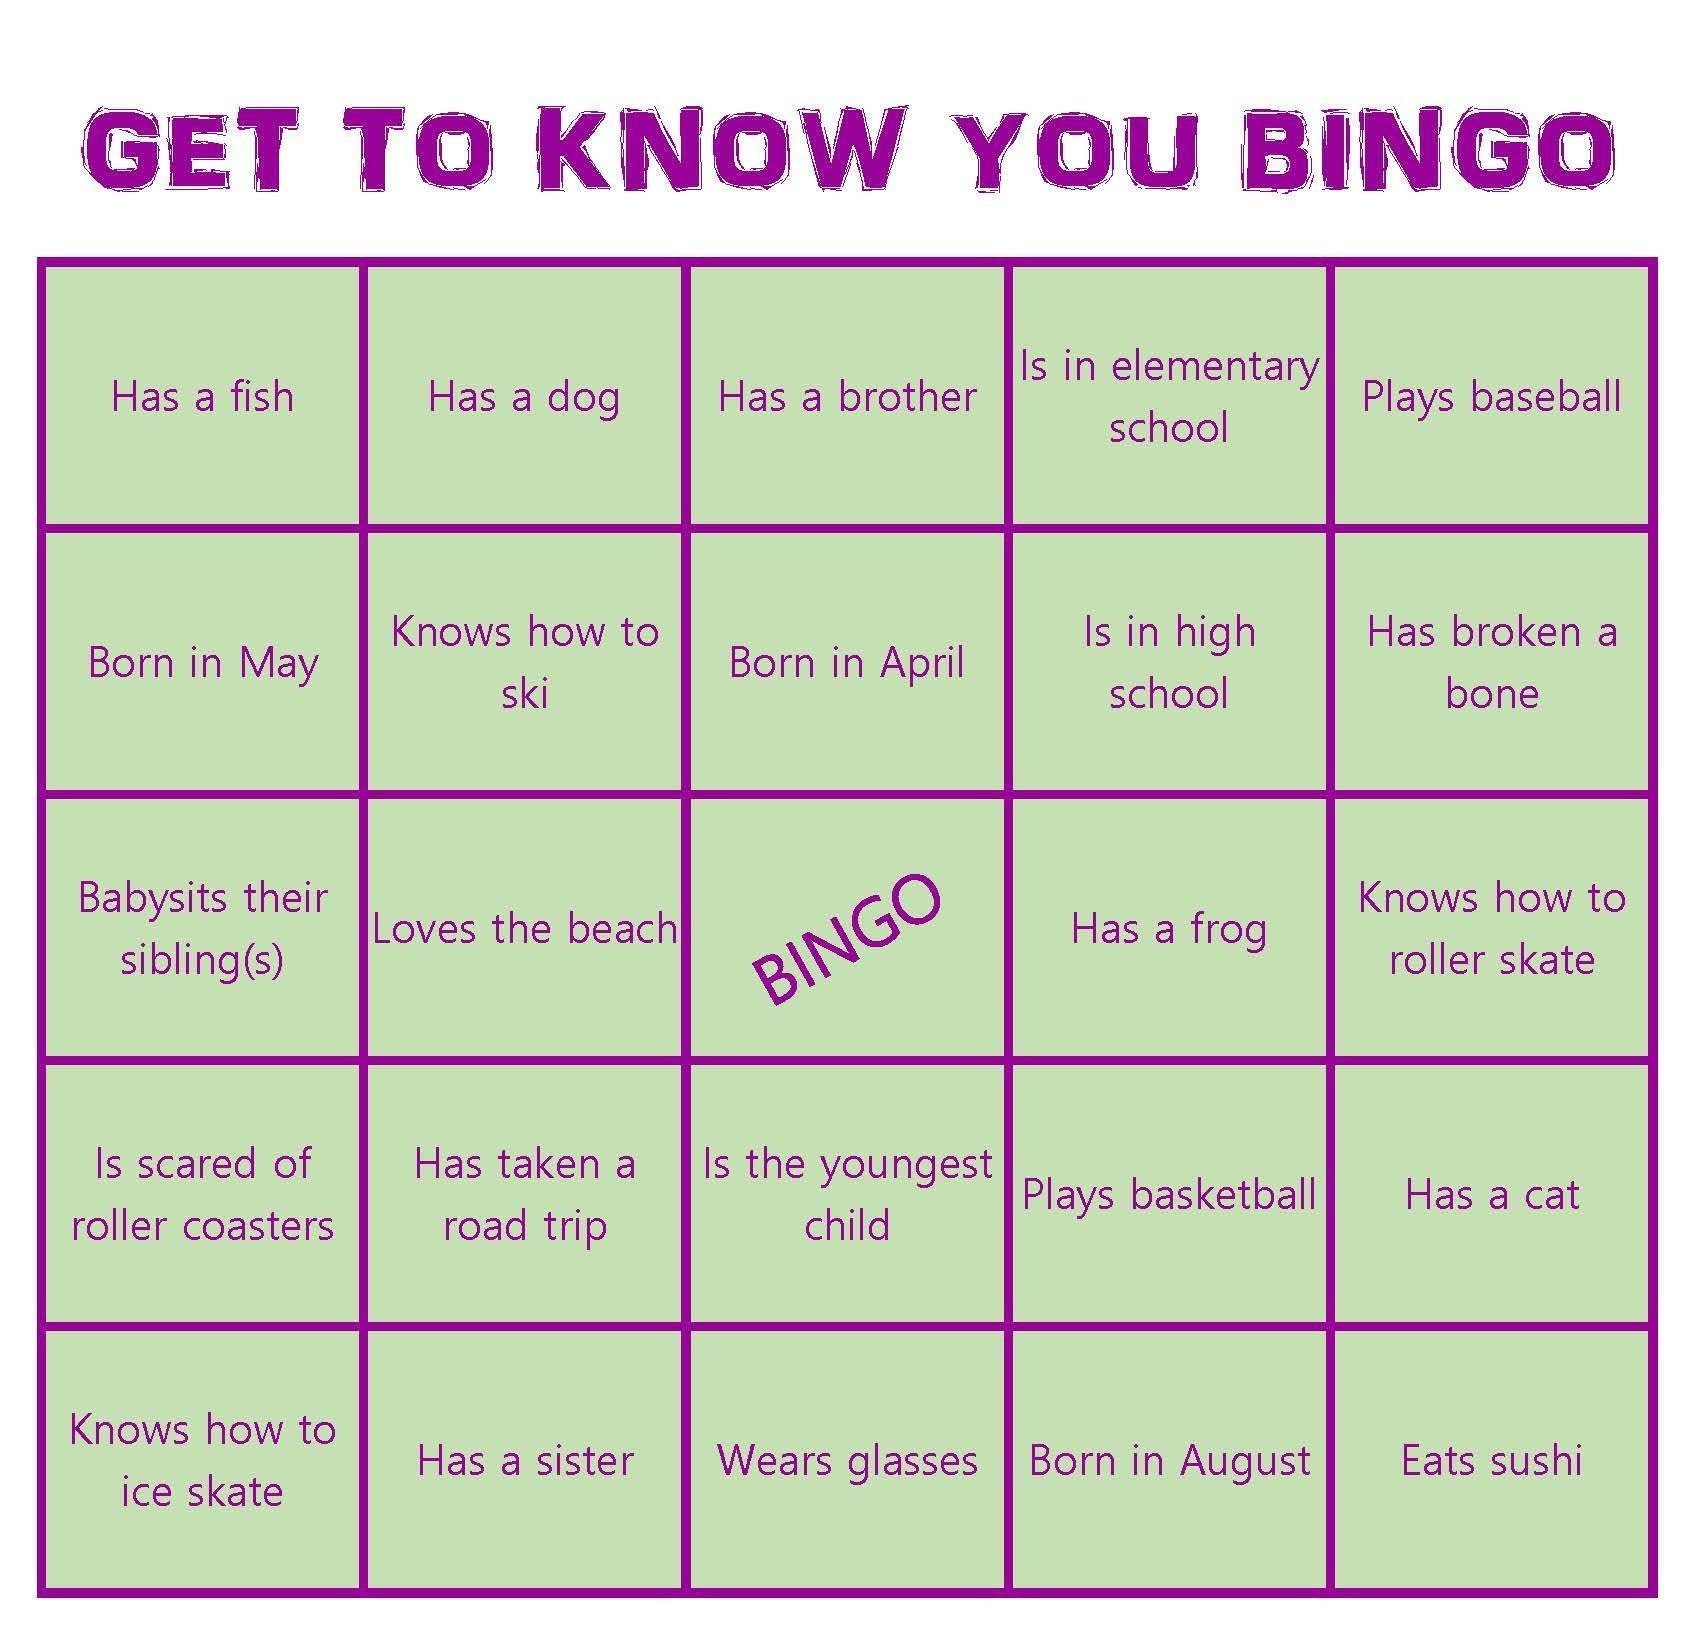 Get to know them better. Cards get to know you. Бинго карточки. Get to know you Bingo. Get to know game.